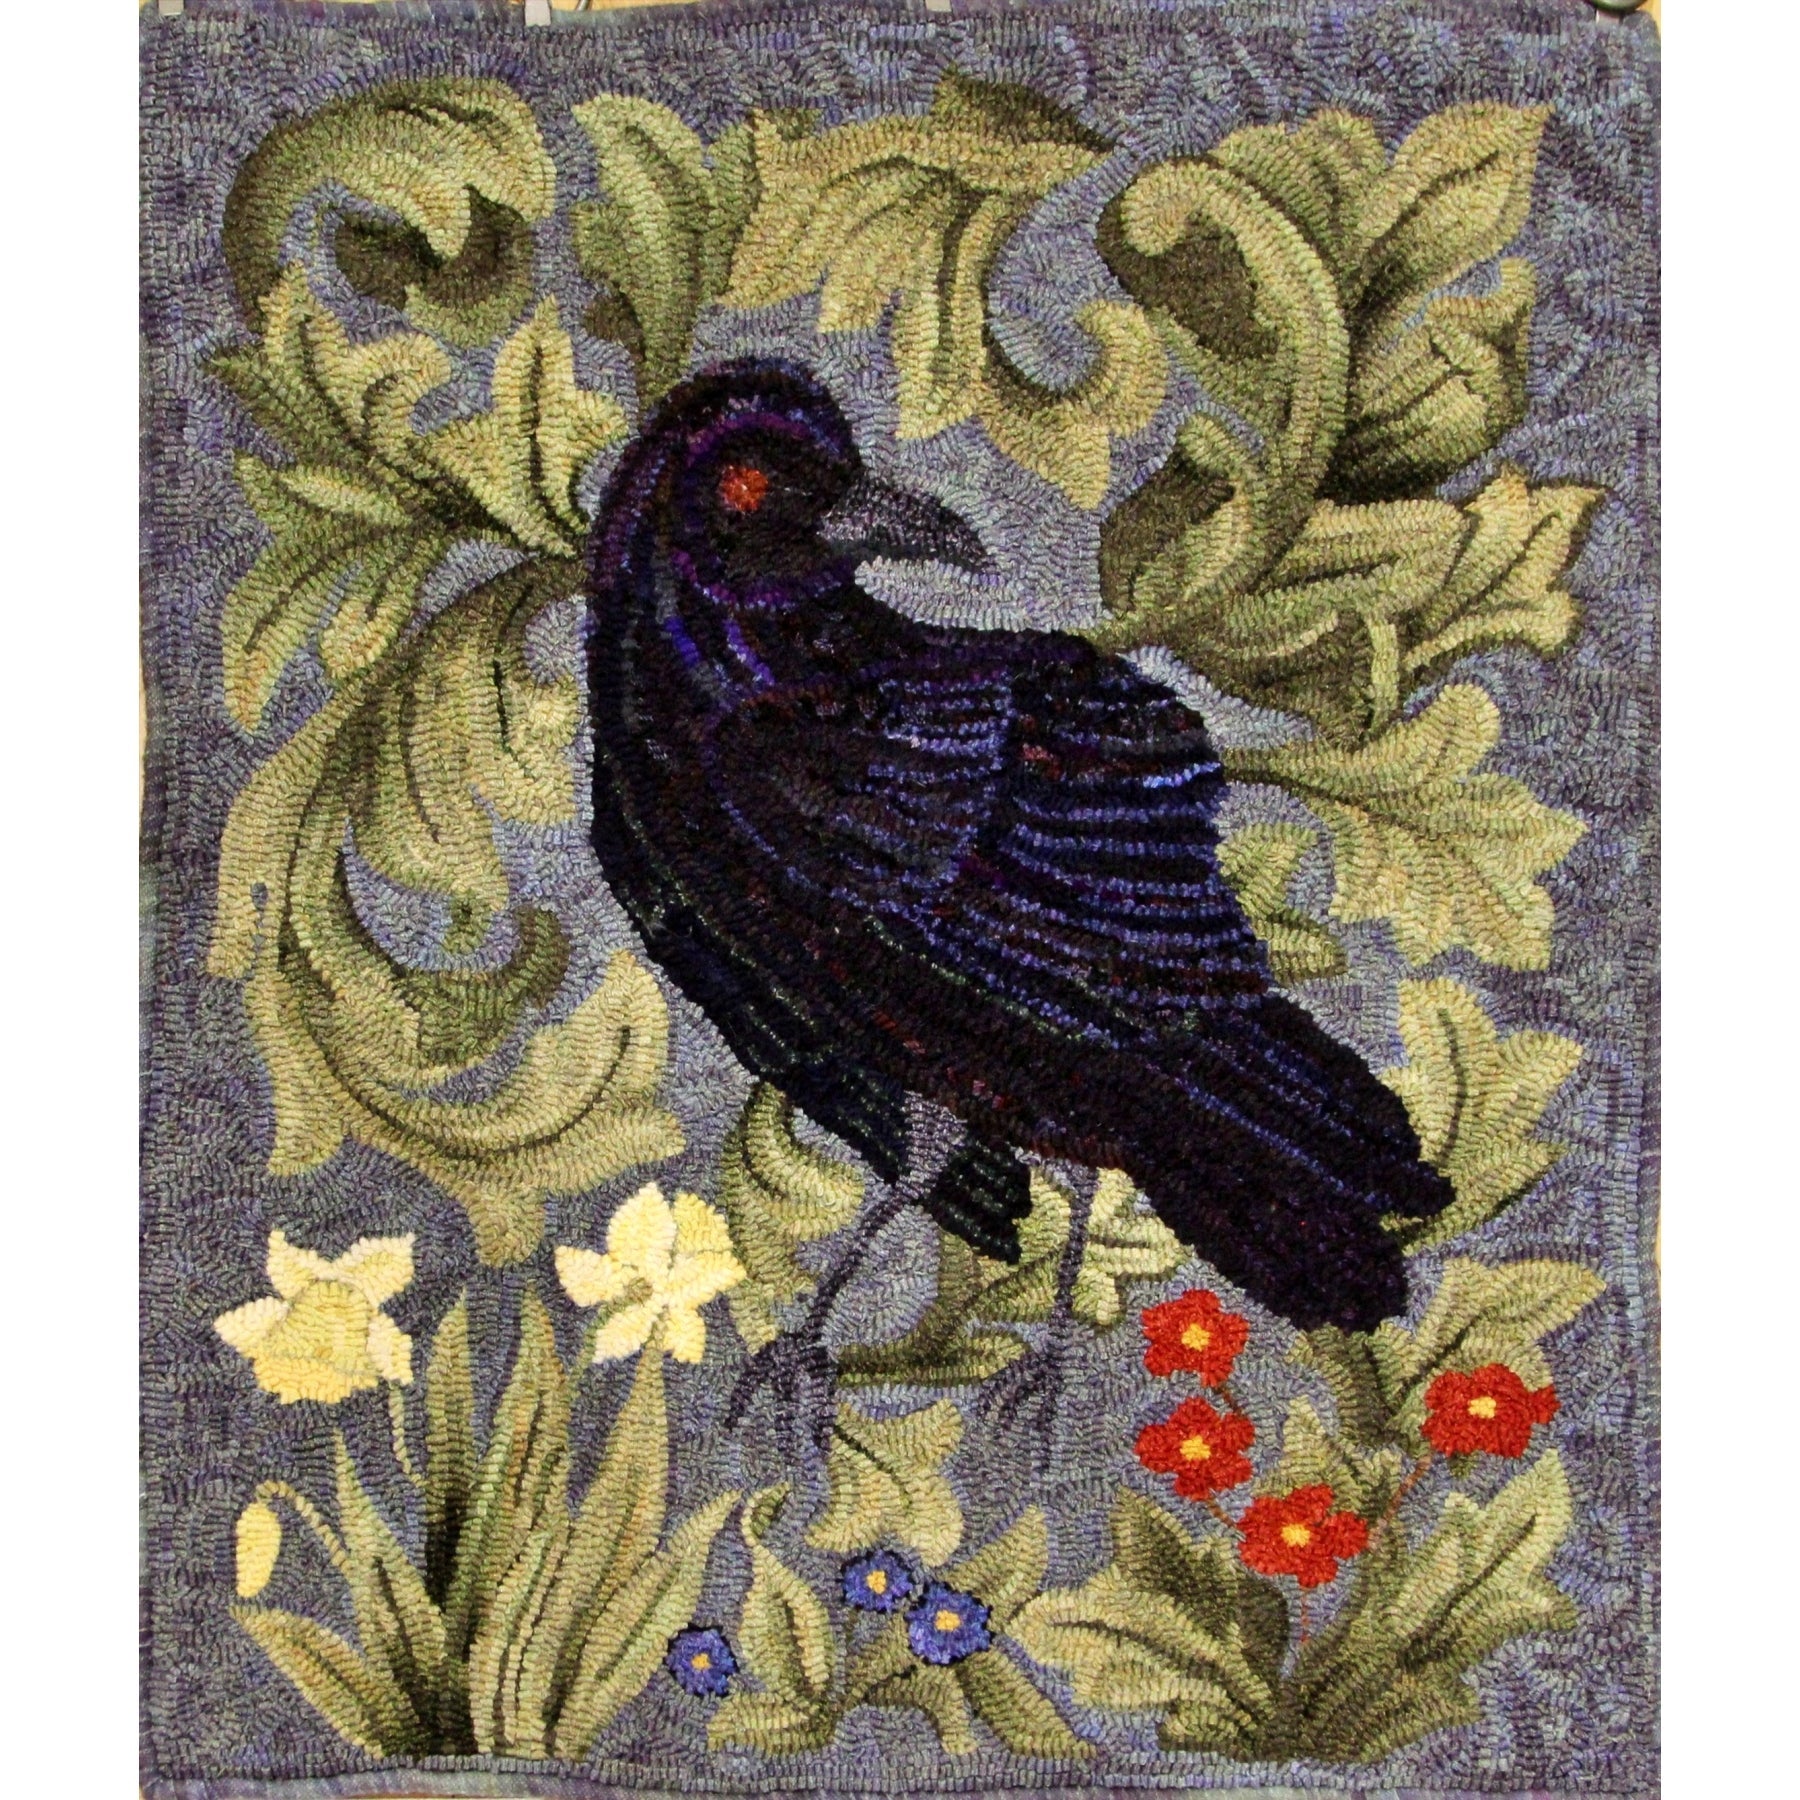 Forest Raven, rug hooked by Marian Hall